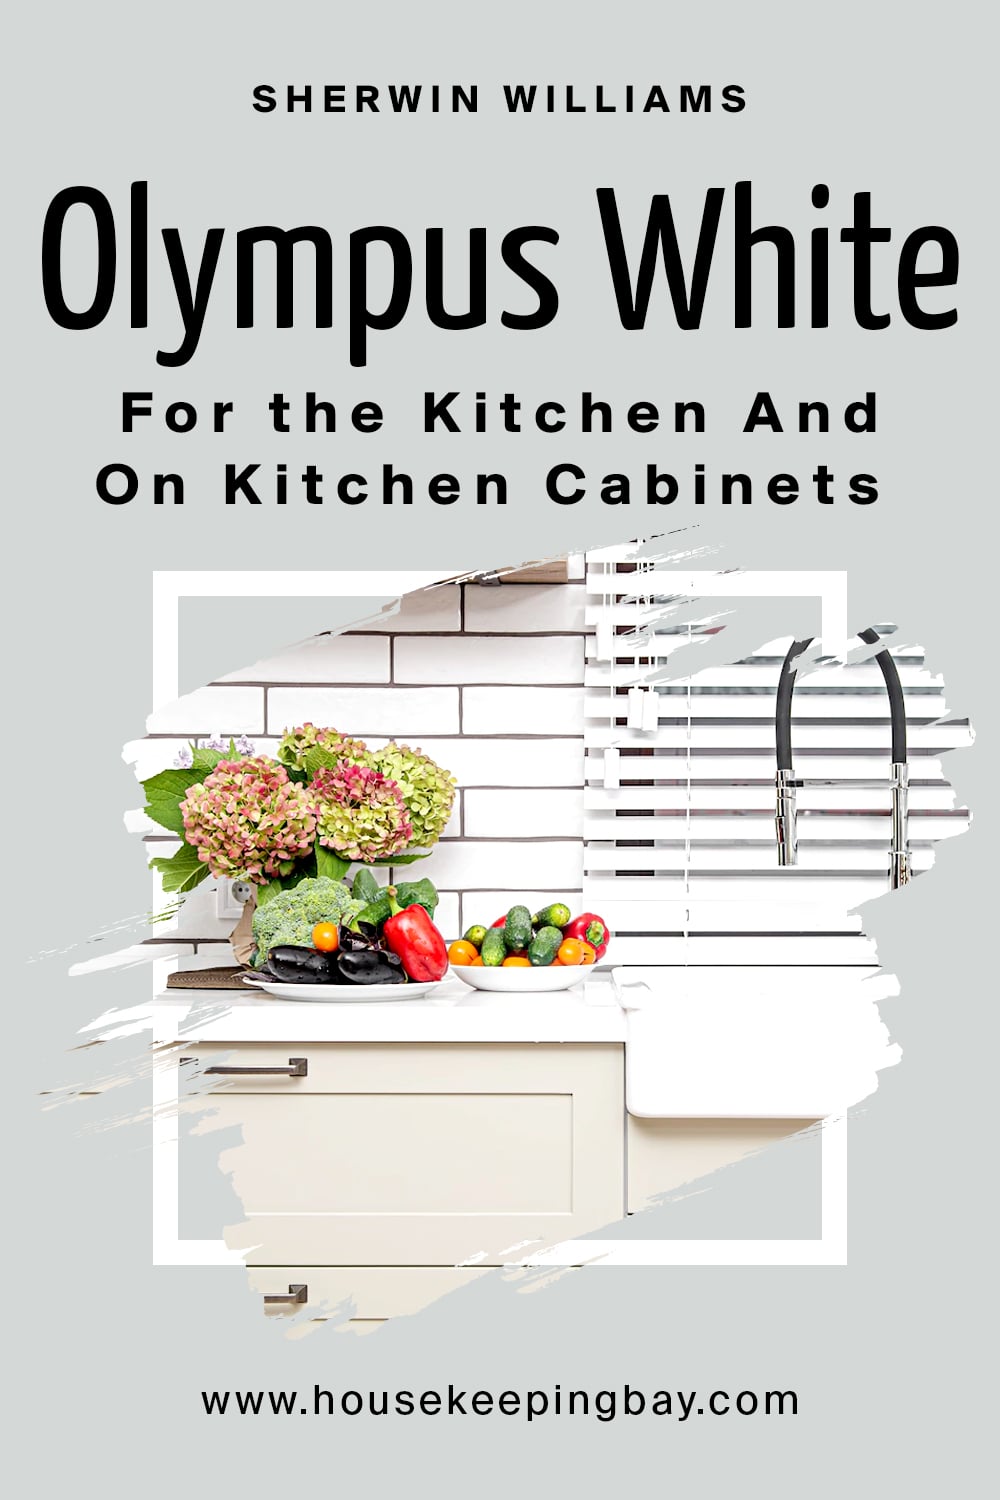 Sherwin Williams. Olympus White For the Kitchen And On Kitchen Cabinets